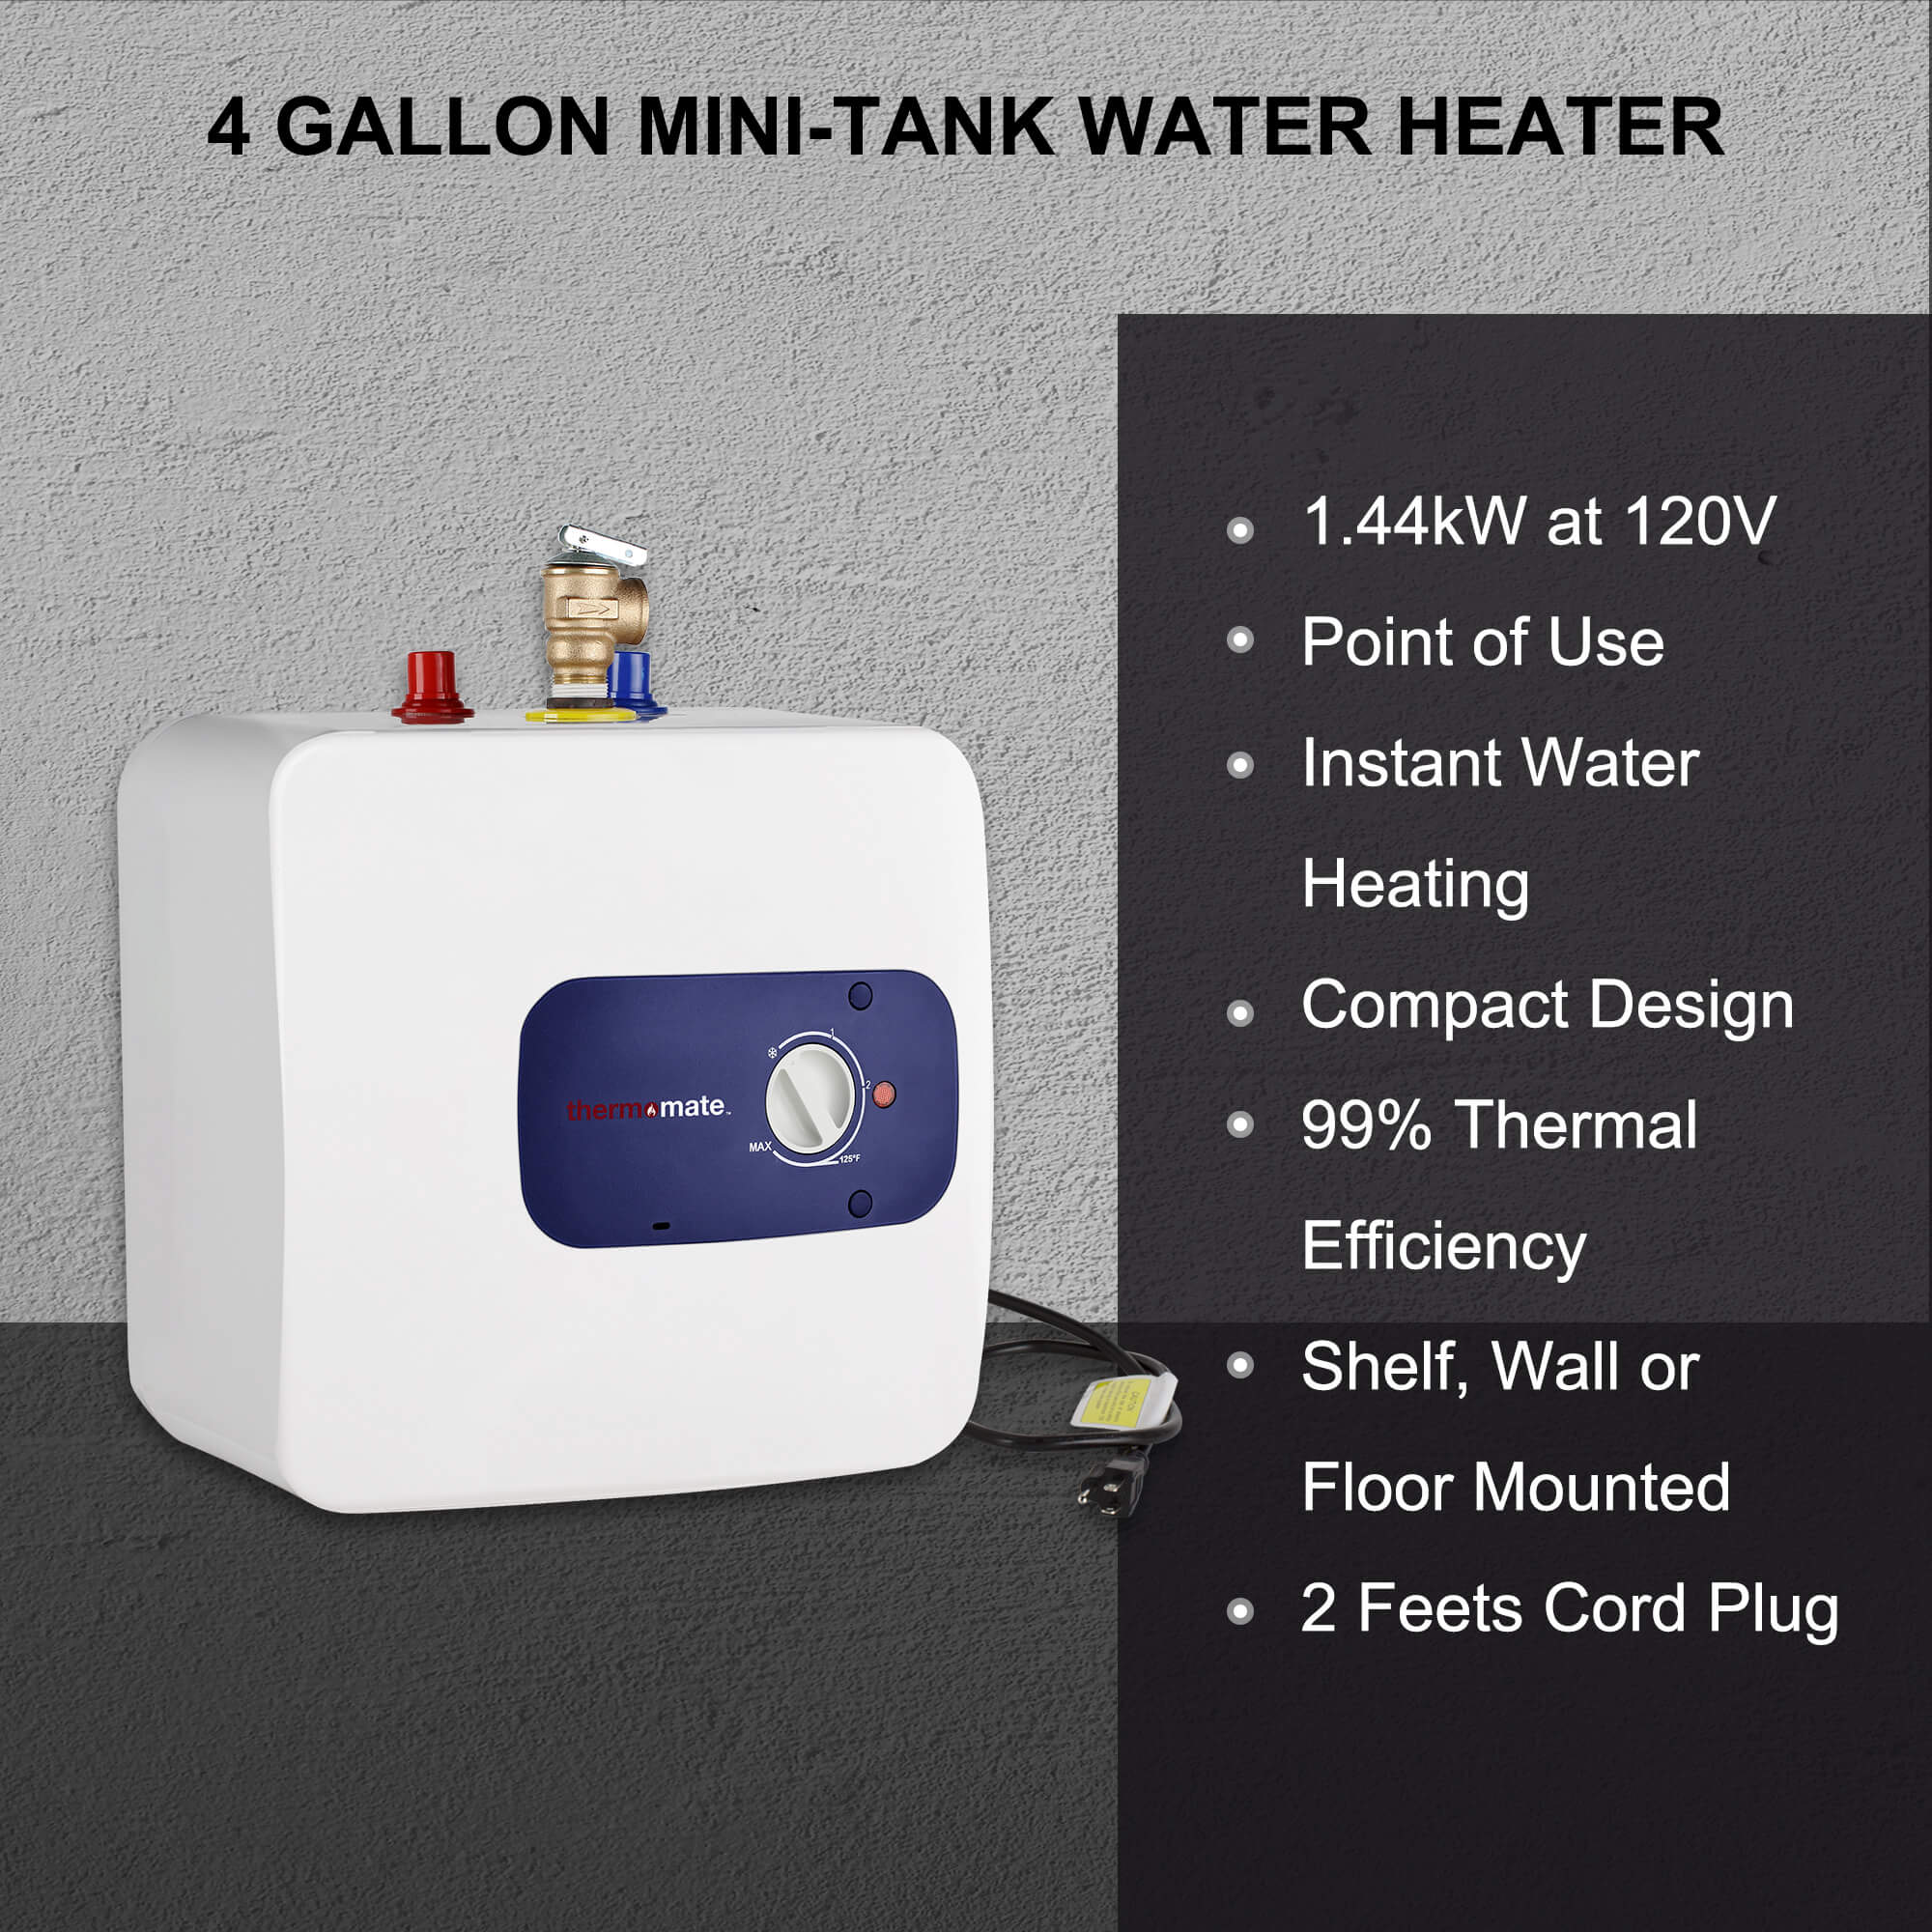 thermomate Mini Tank Electric Water Heater ES400 4 Gallons Point of Use Water Heater for Instant Hot Water Under Kitchen Sink 120V 1440W